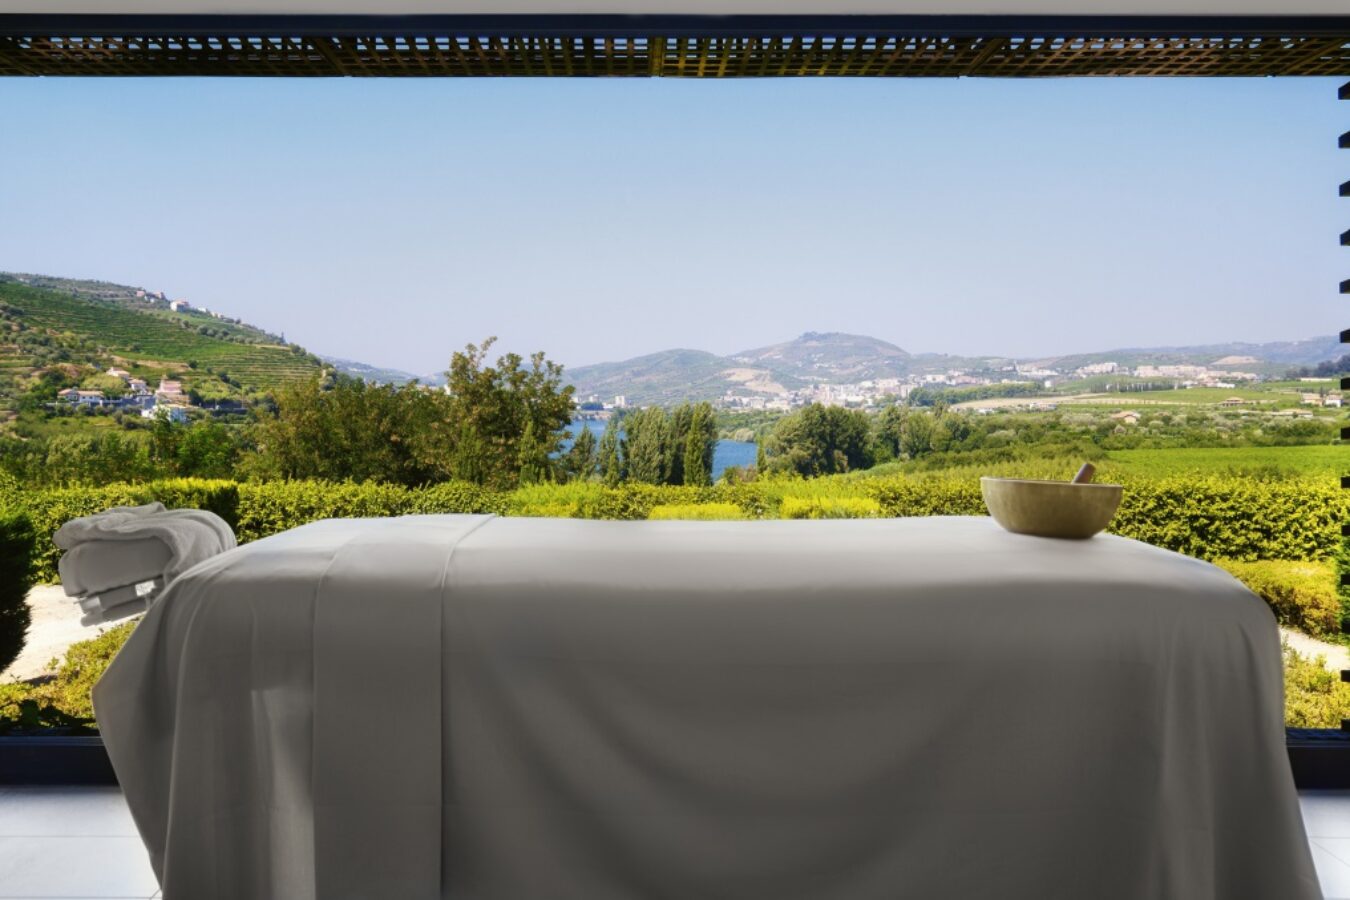 Review - We Check in to Six Senses, Douro Valley